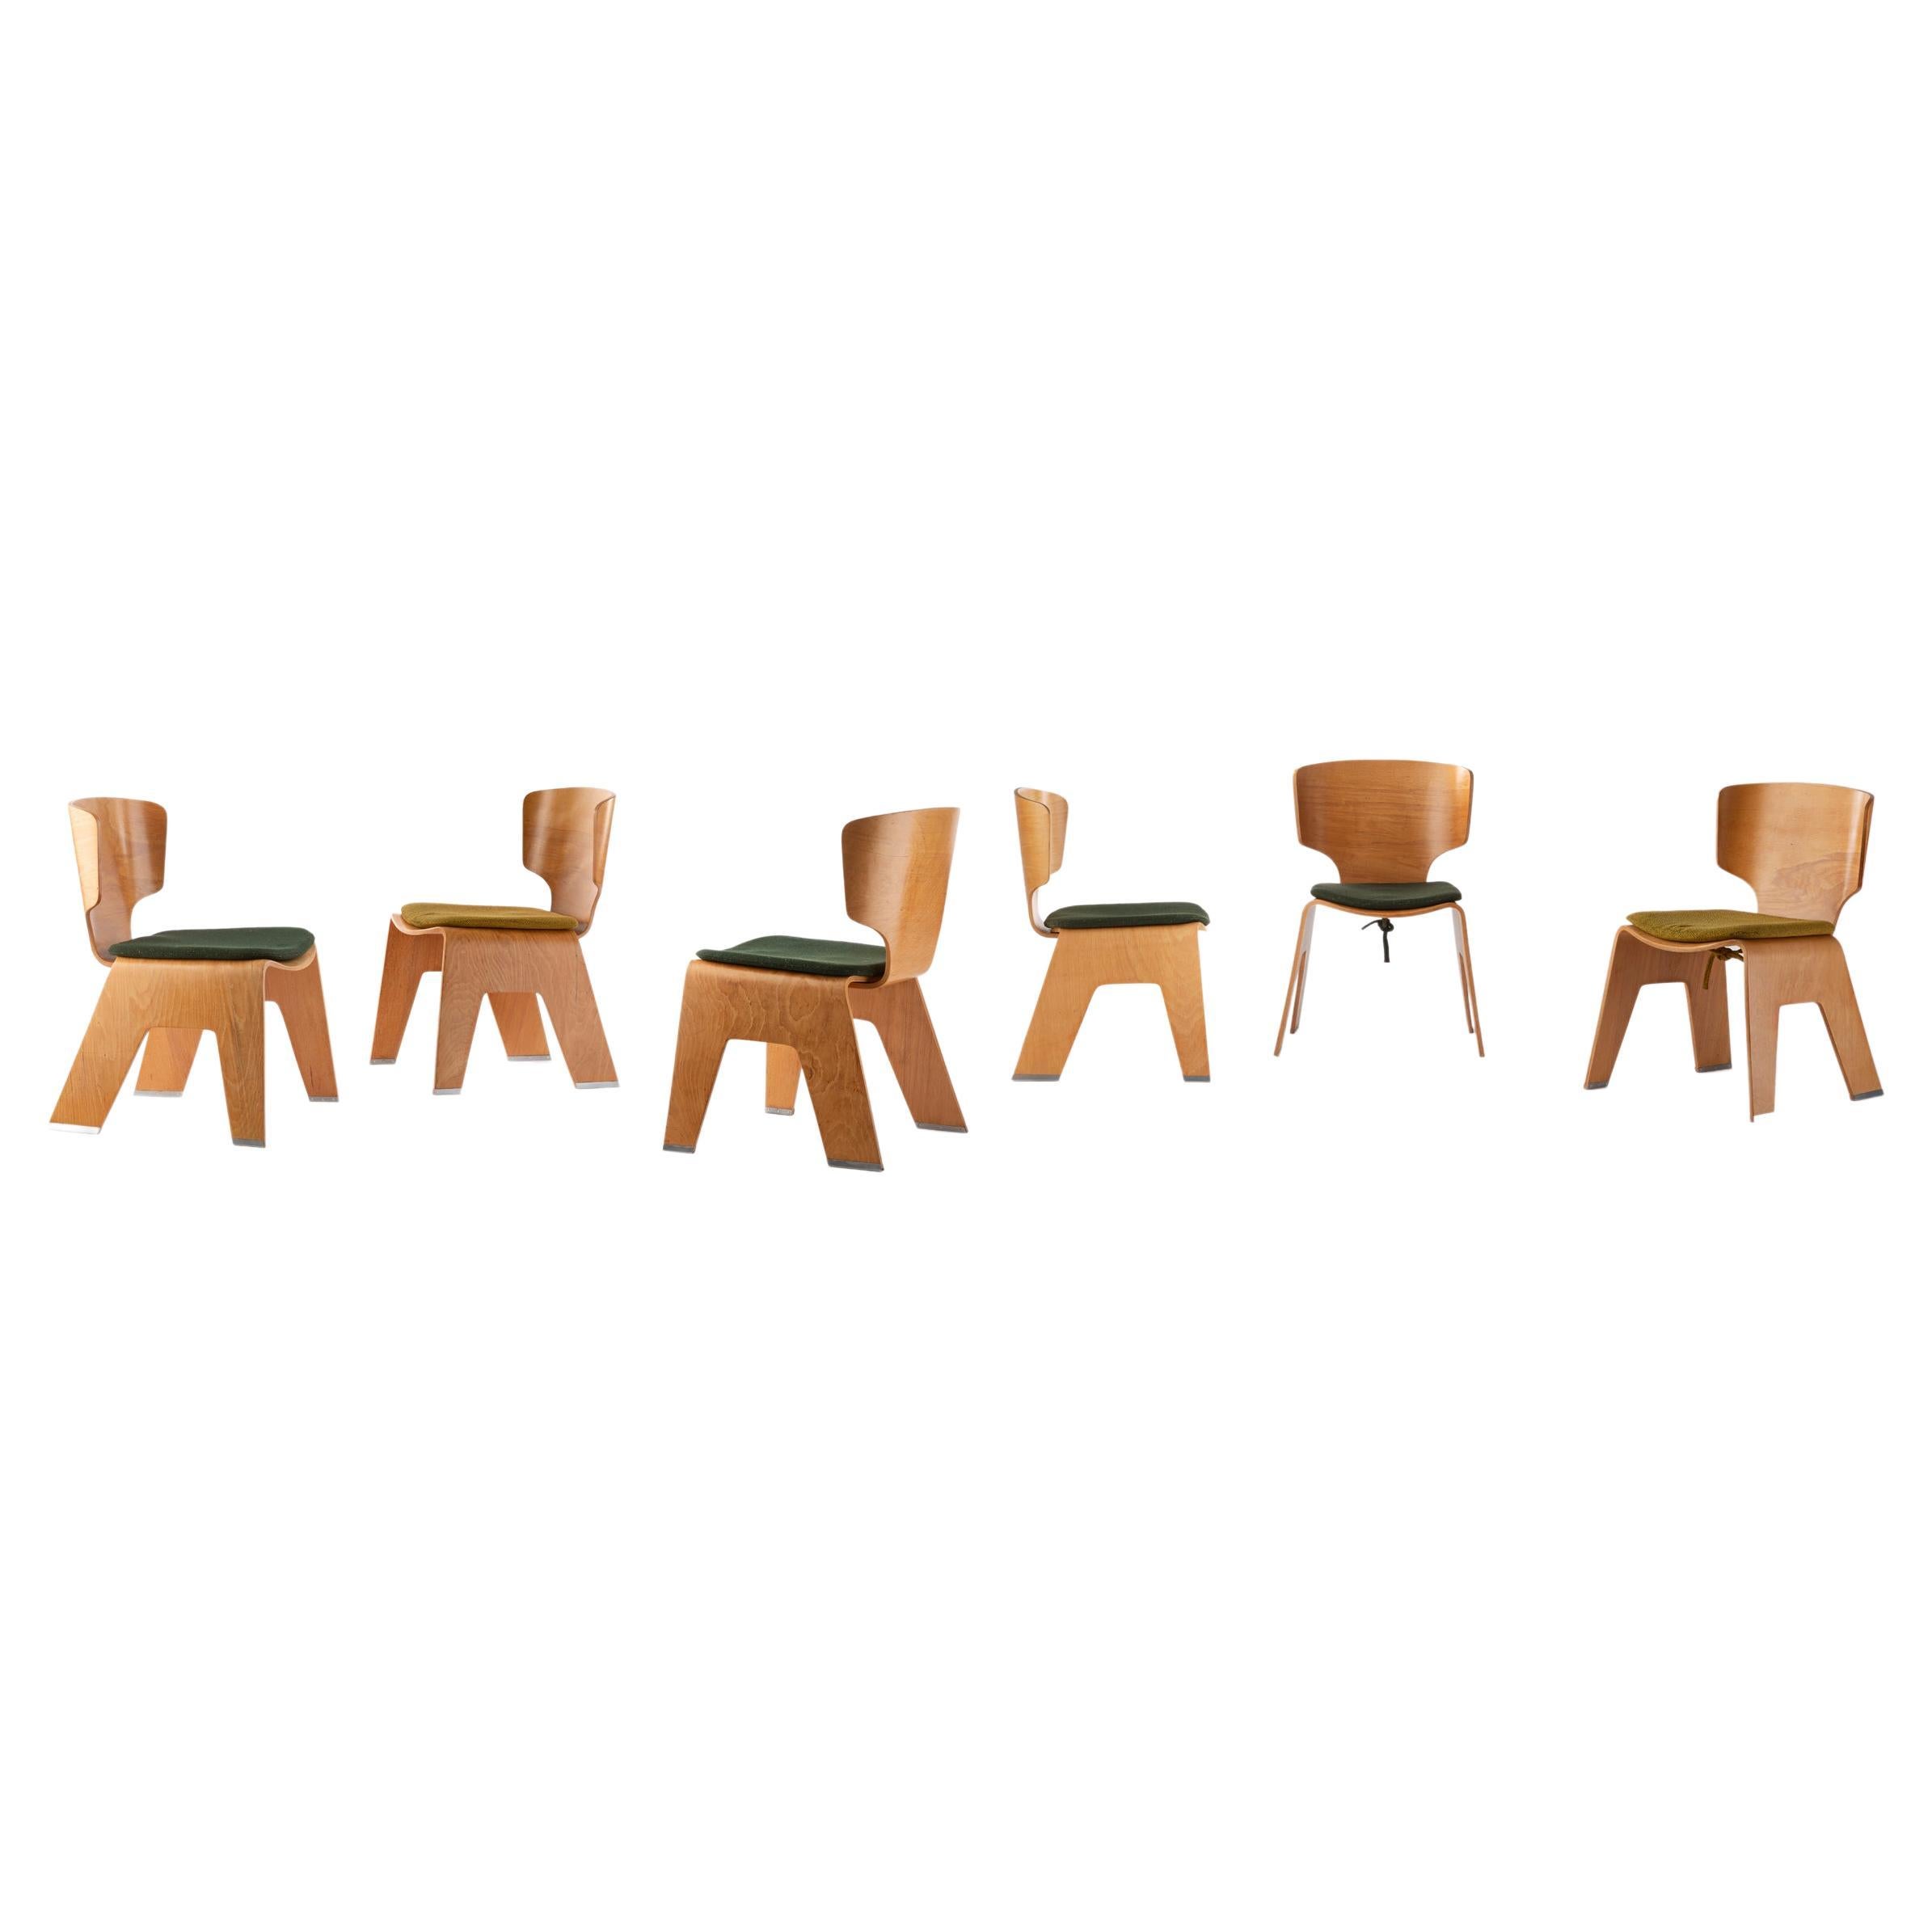 Set of six chairs from the Sumi Memorial Hall by Kenzo Tange For Sale